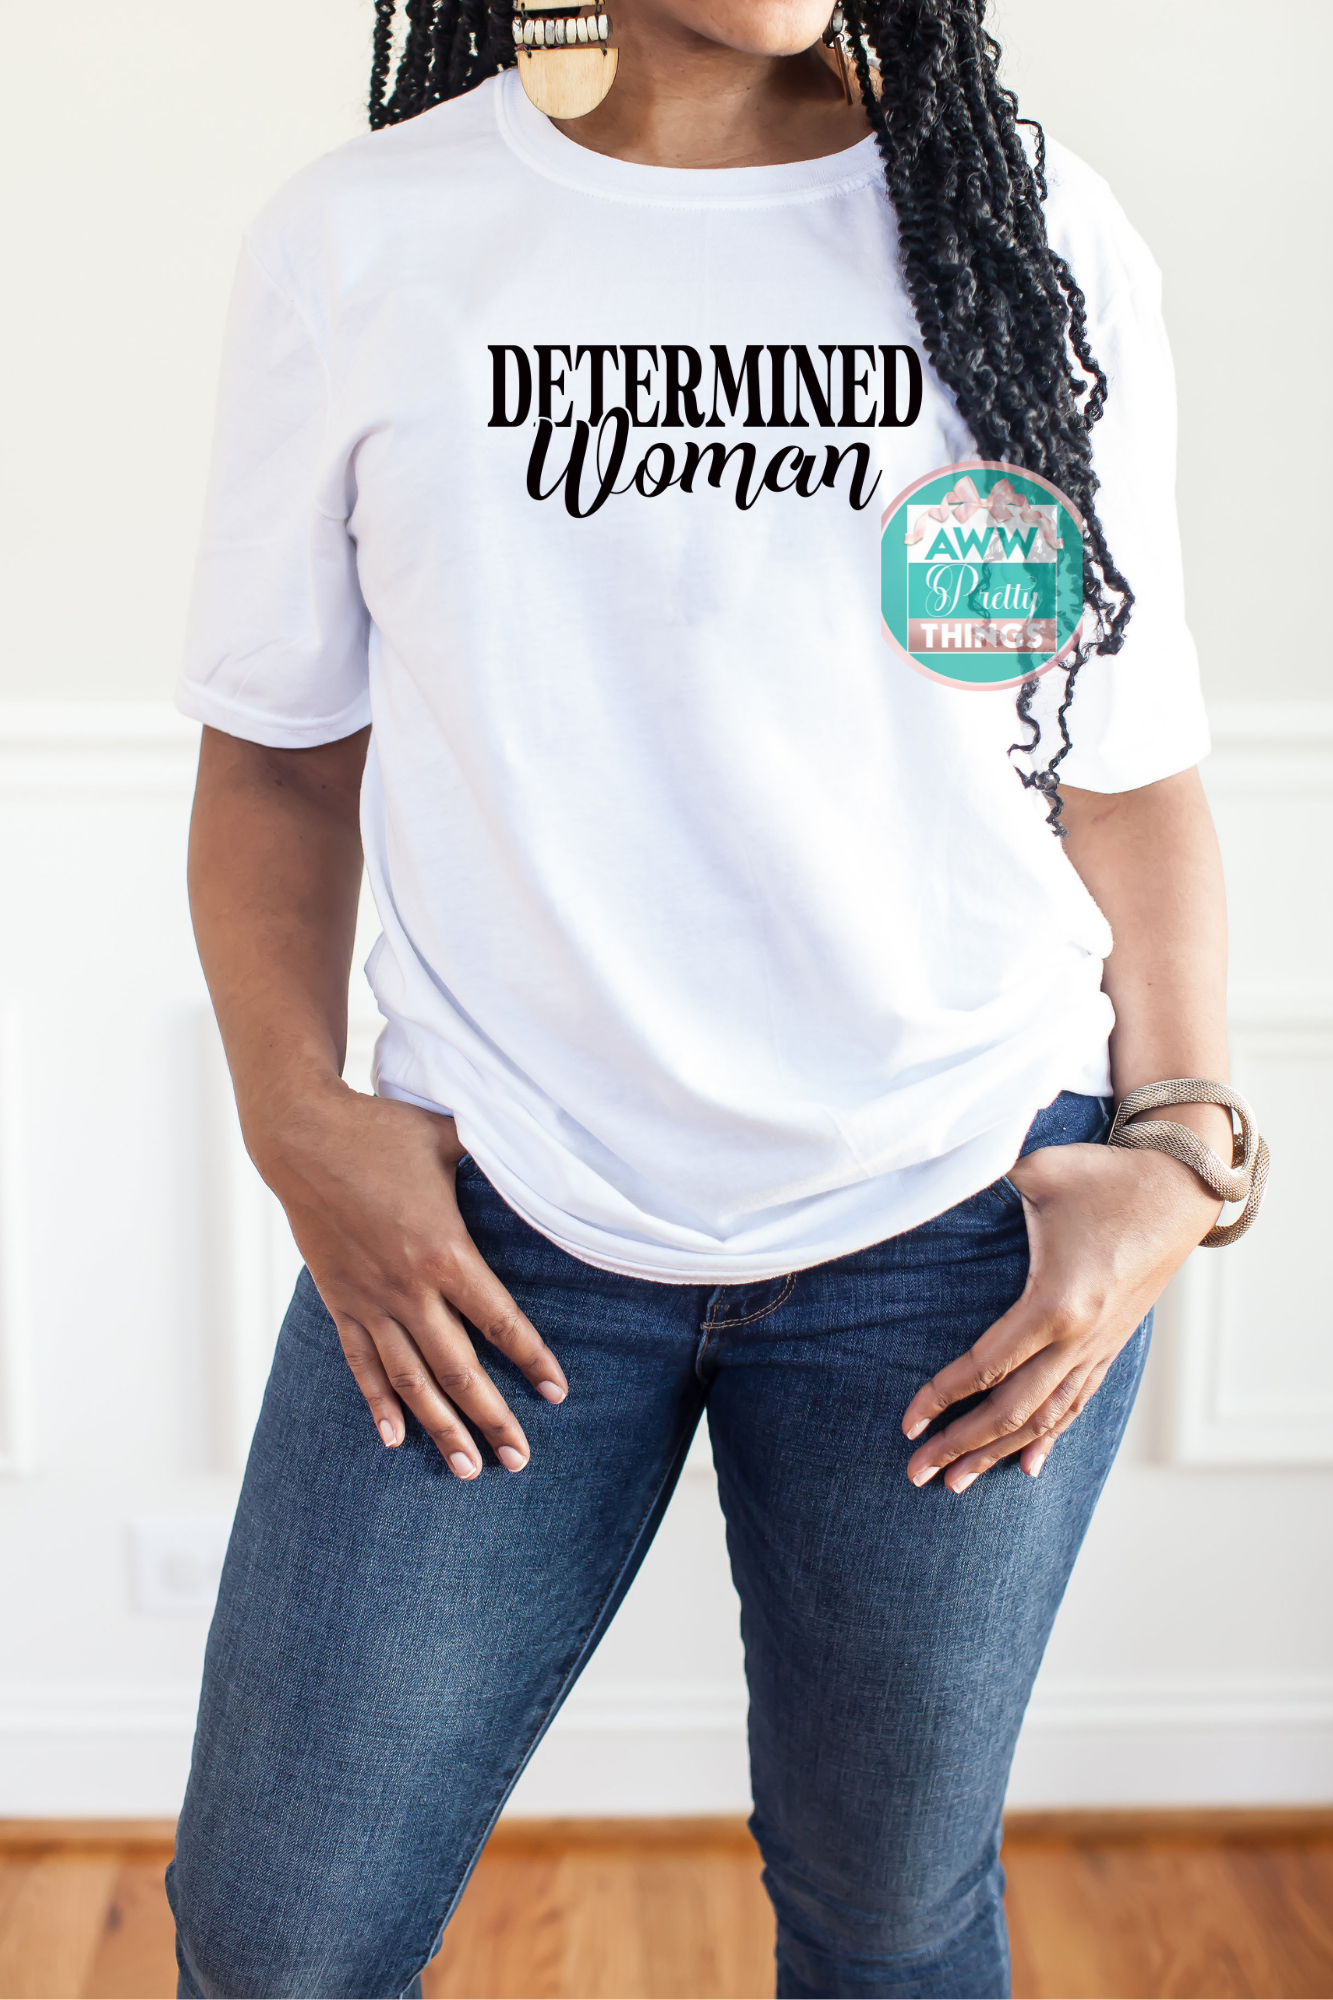 Determined Woman Shirt